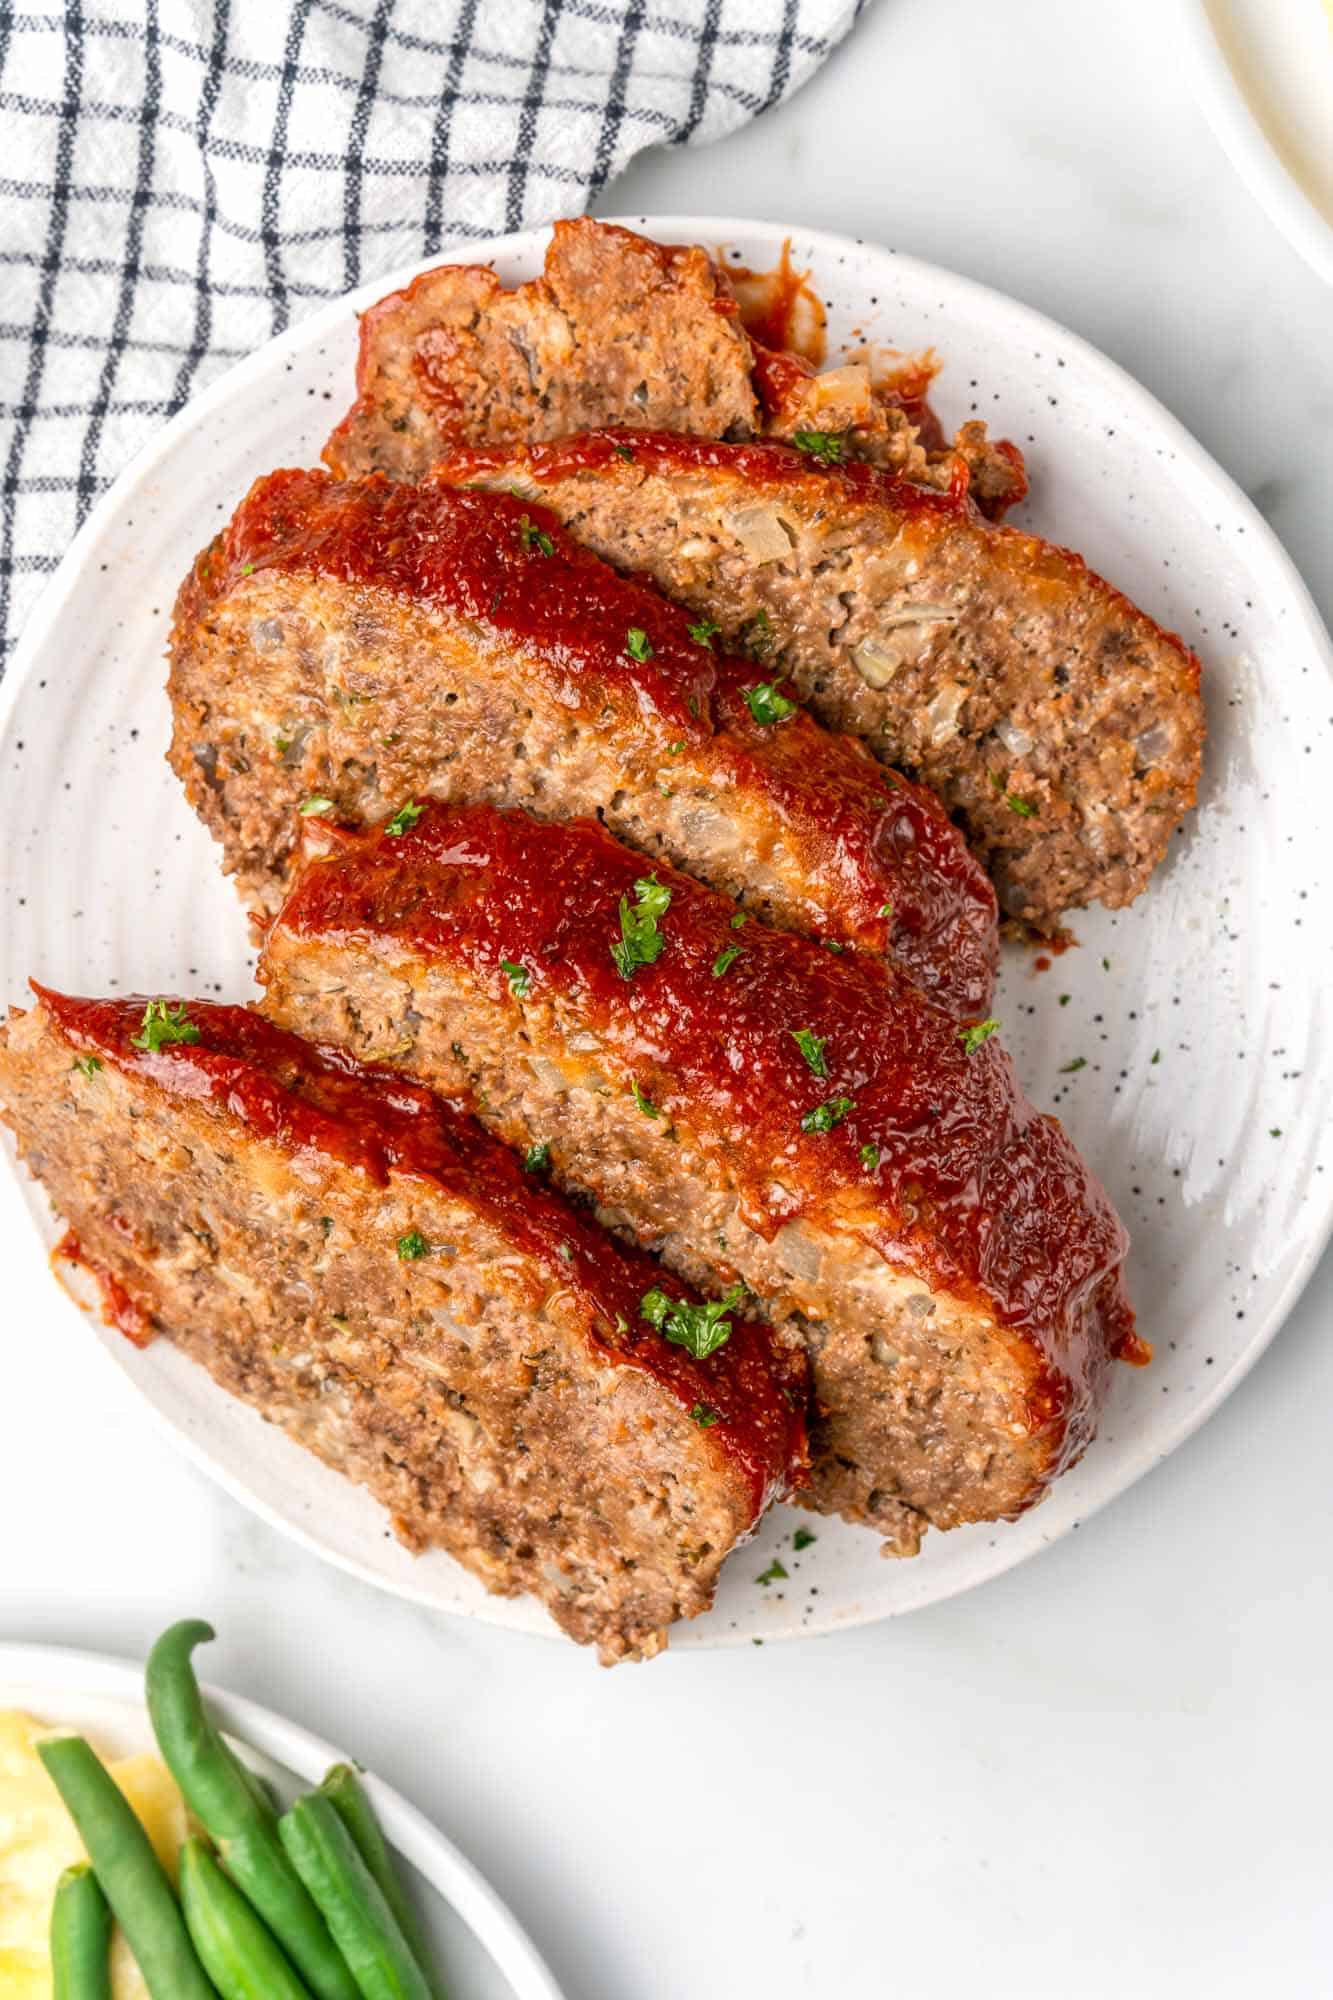 Slices of meatloaf on a white plate.